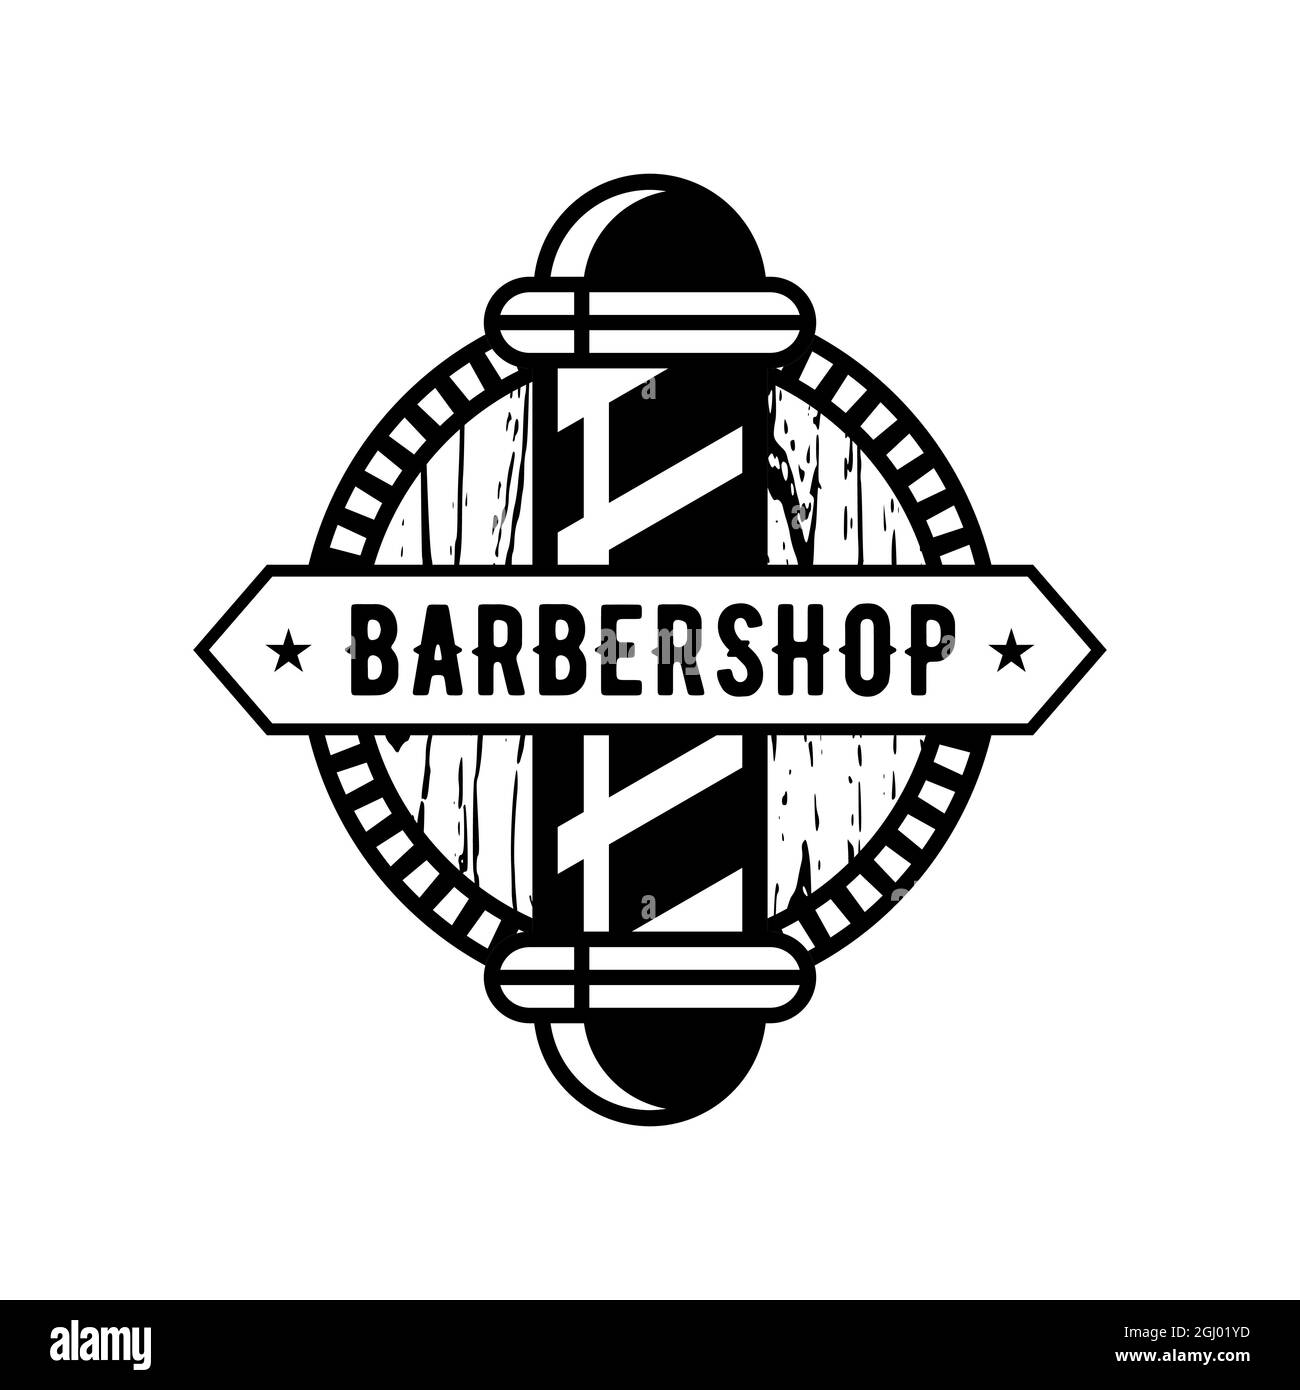 Retro barbershop logo with pole. Vintage lettering barber shop emblem. Gentleman haircut and shaves salon. Simple minimalist black and white logotype. Stock Vector